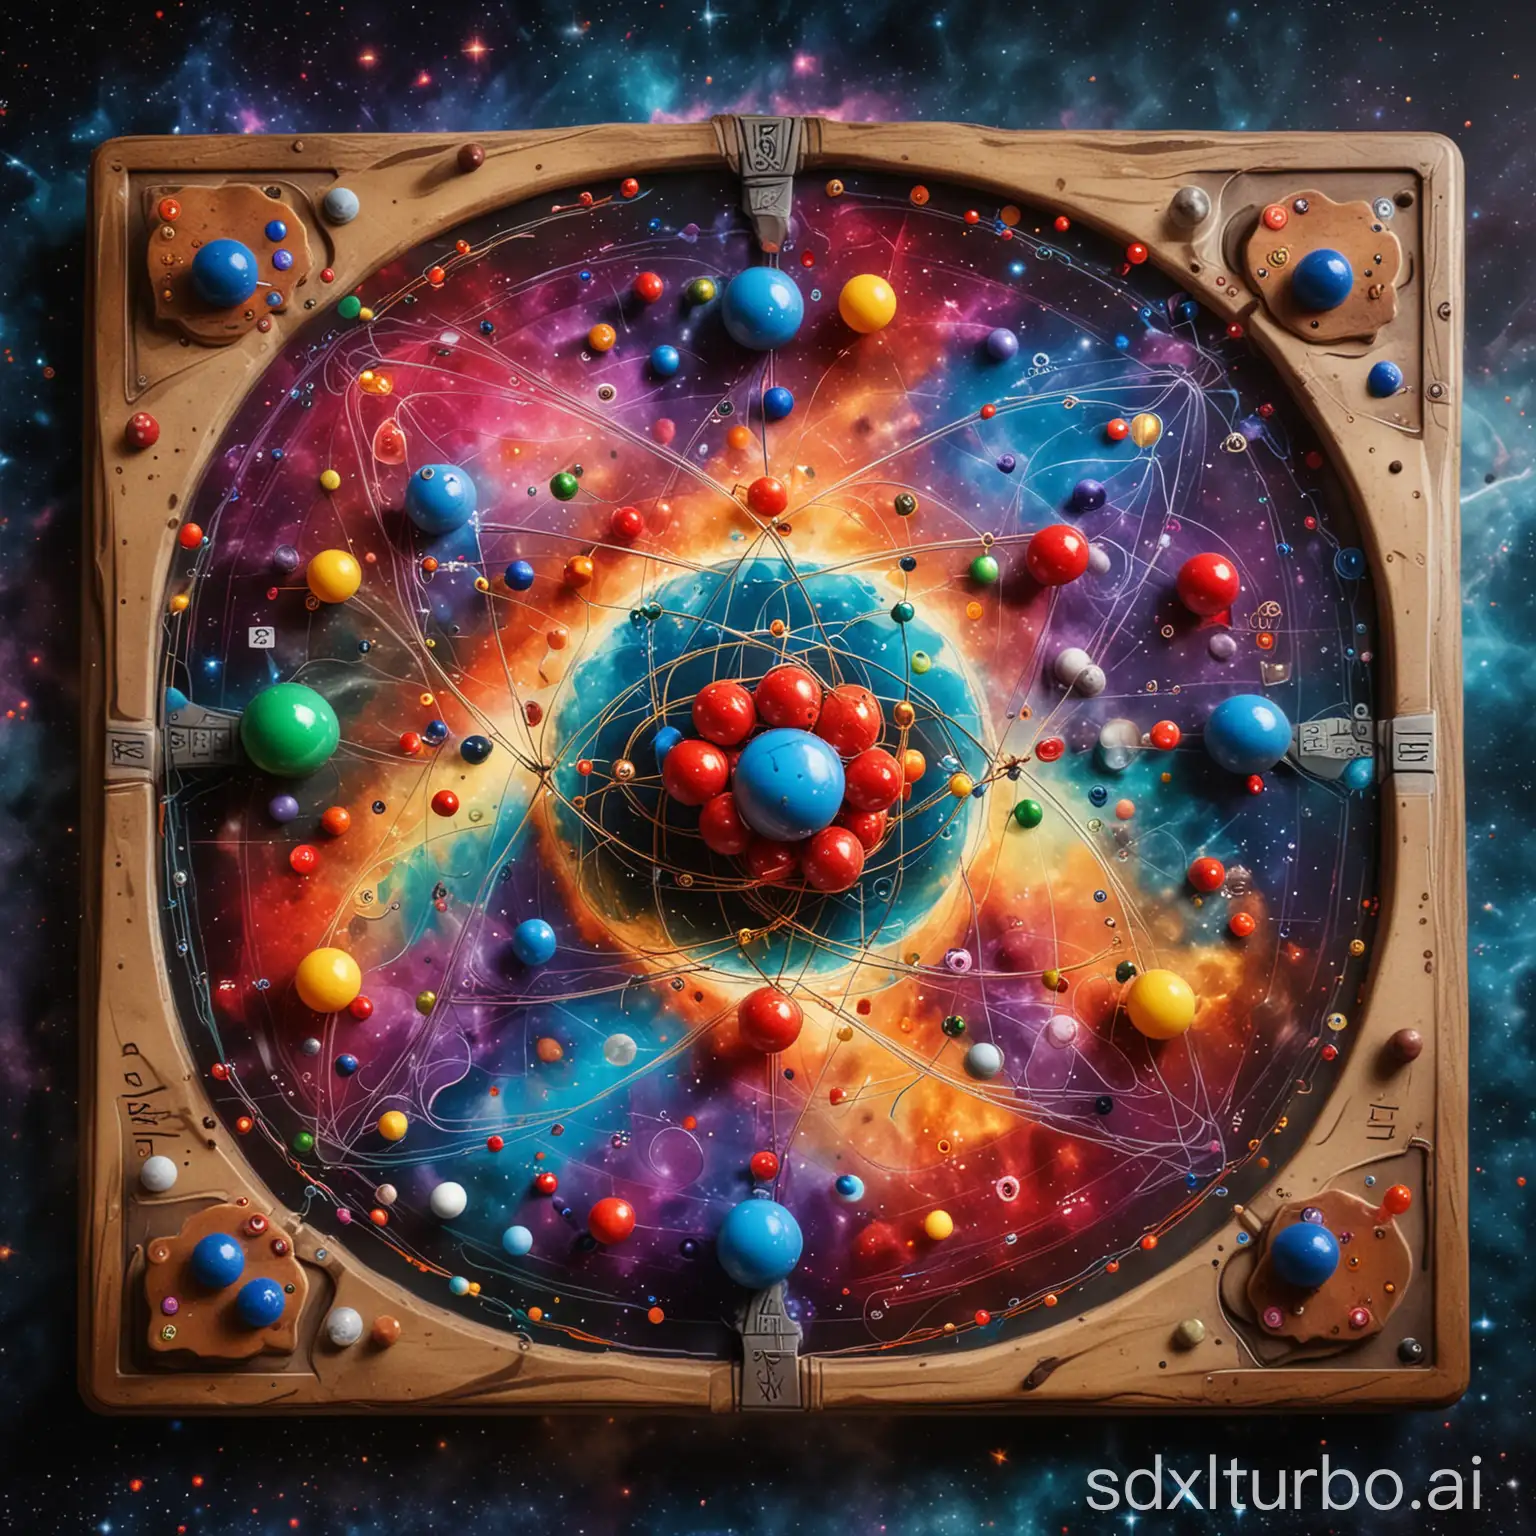 A vibrant, colorful Match-3 game board based on the model of an atom. The board is filled with protons, neutrons, and electrons. The background is a swirling nebula.